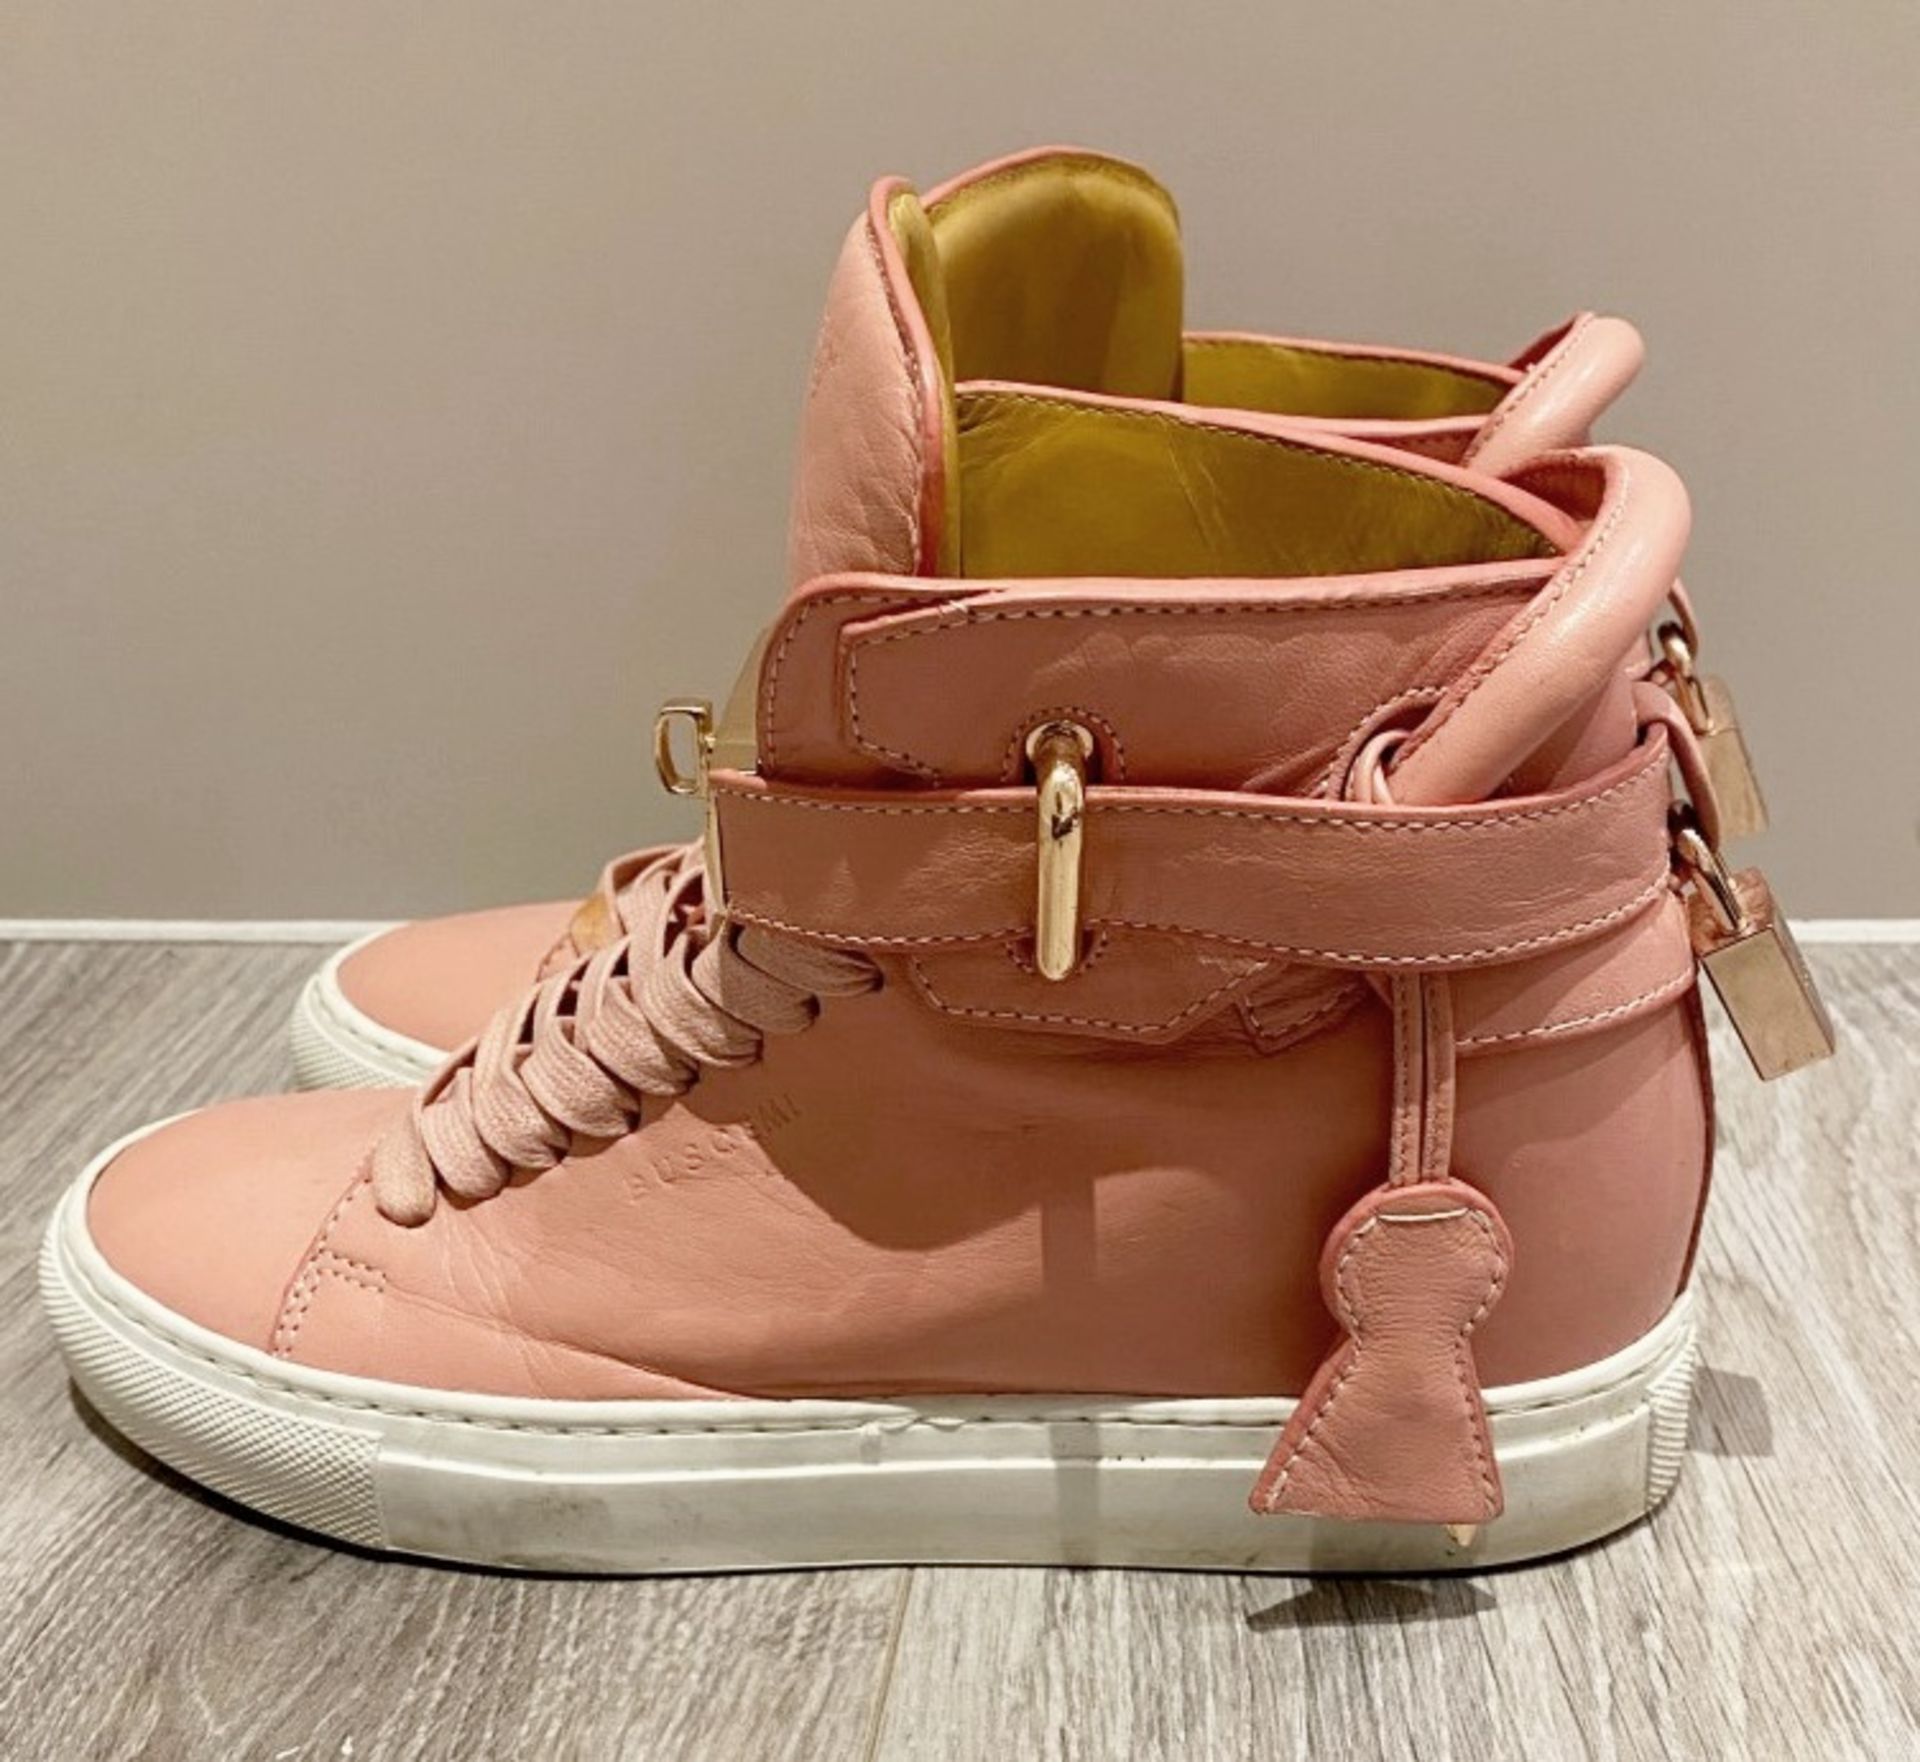 1 x Pair Of Genuine Buscemi Sneakers In Pink - Size: 36 - Preowned in Worn Condition - Ref: LOT22 -